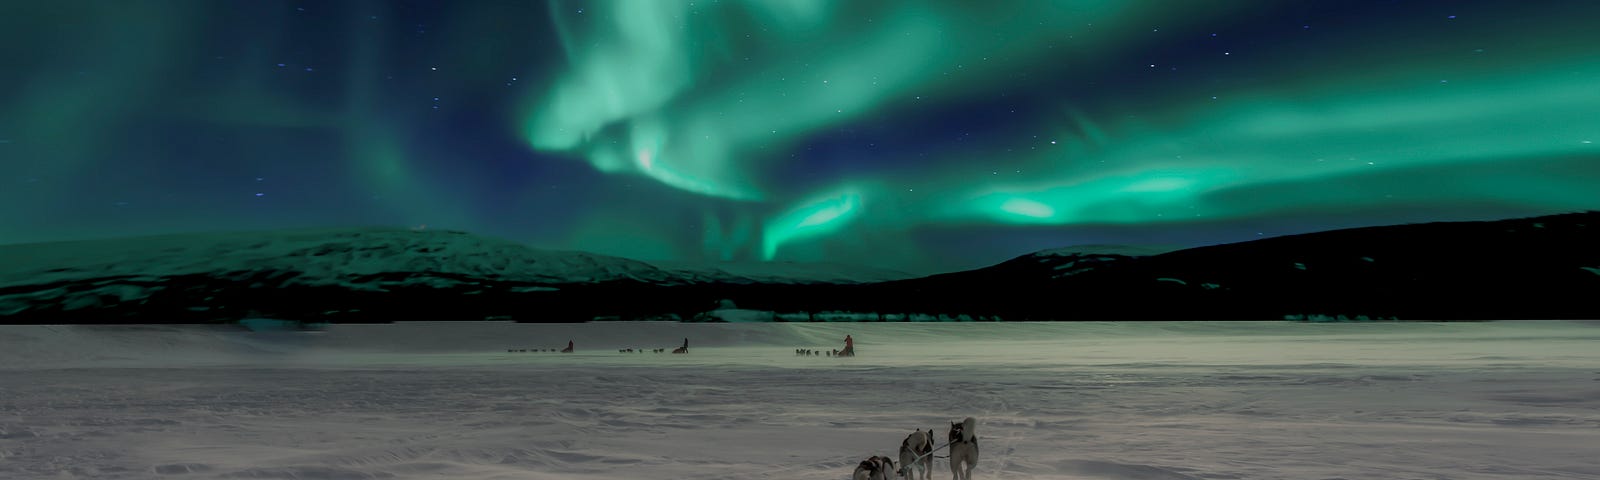 Huskies dog sledding with a green-blue aurora against a darkened sky; another team of dog sledders ahead.